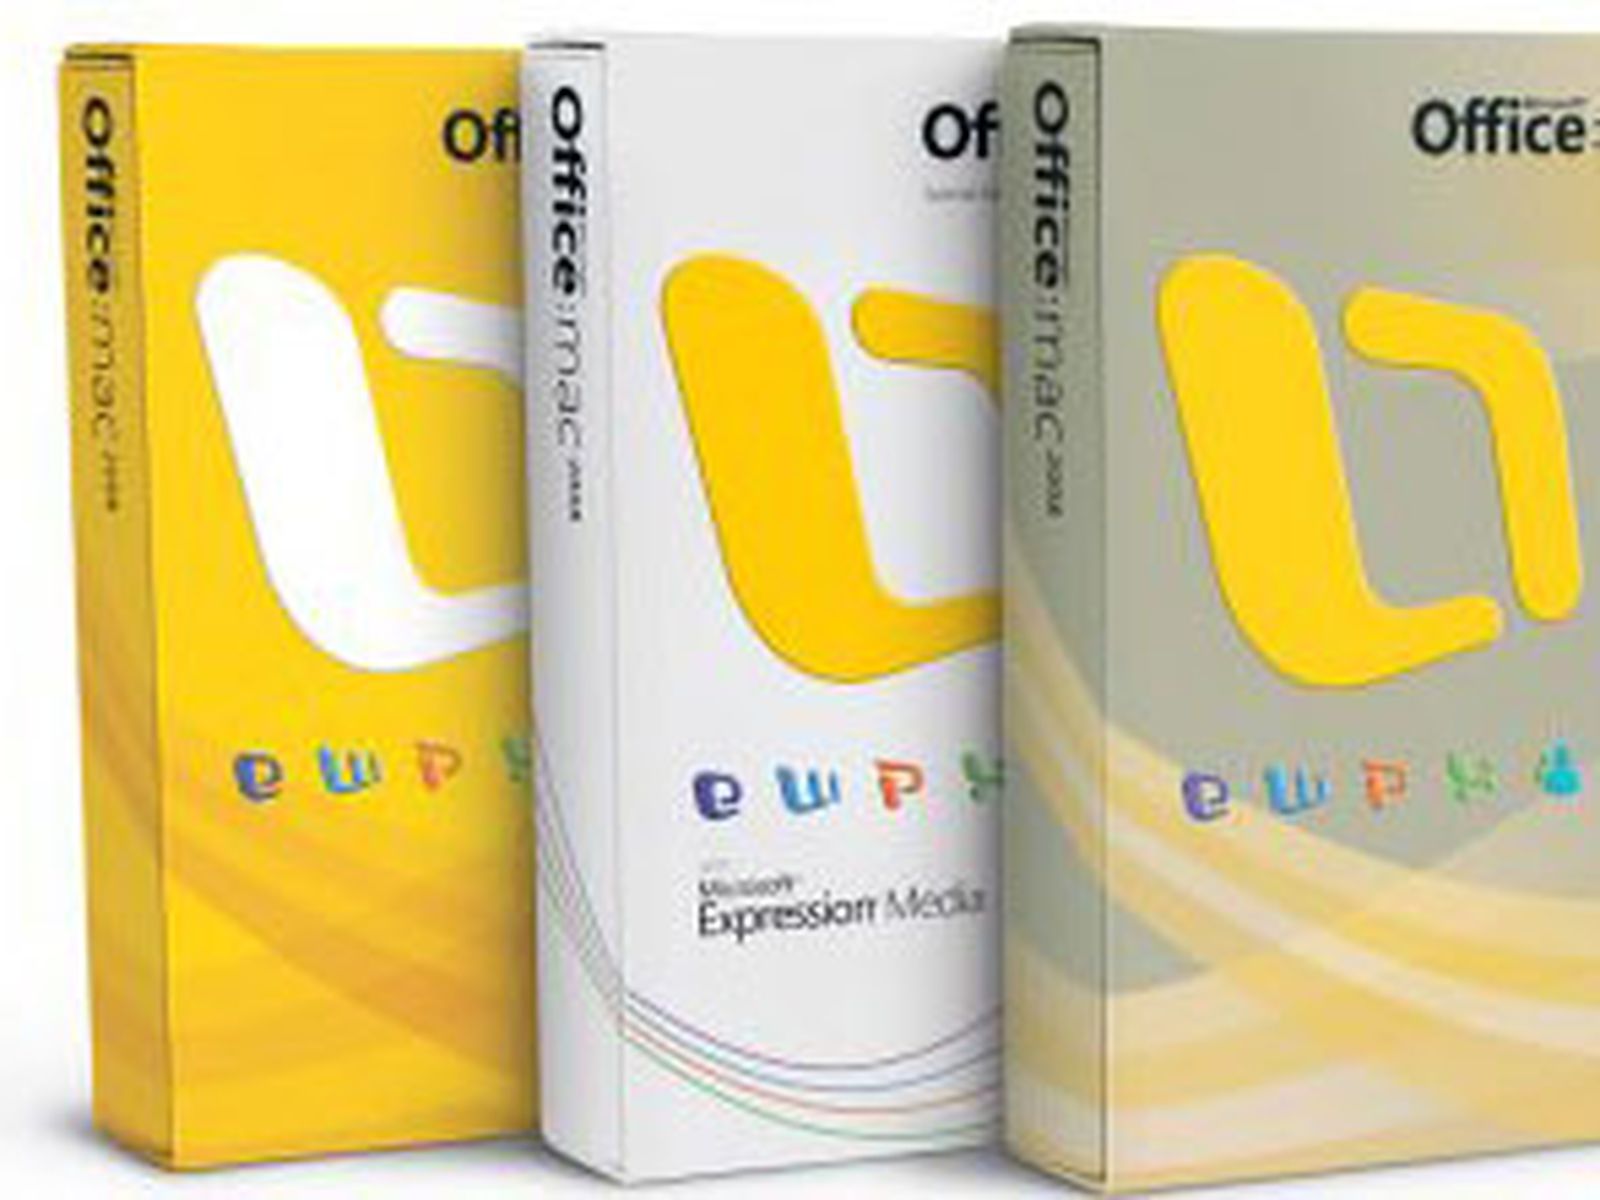 2008 microsoft office for mac software